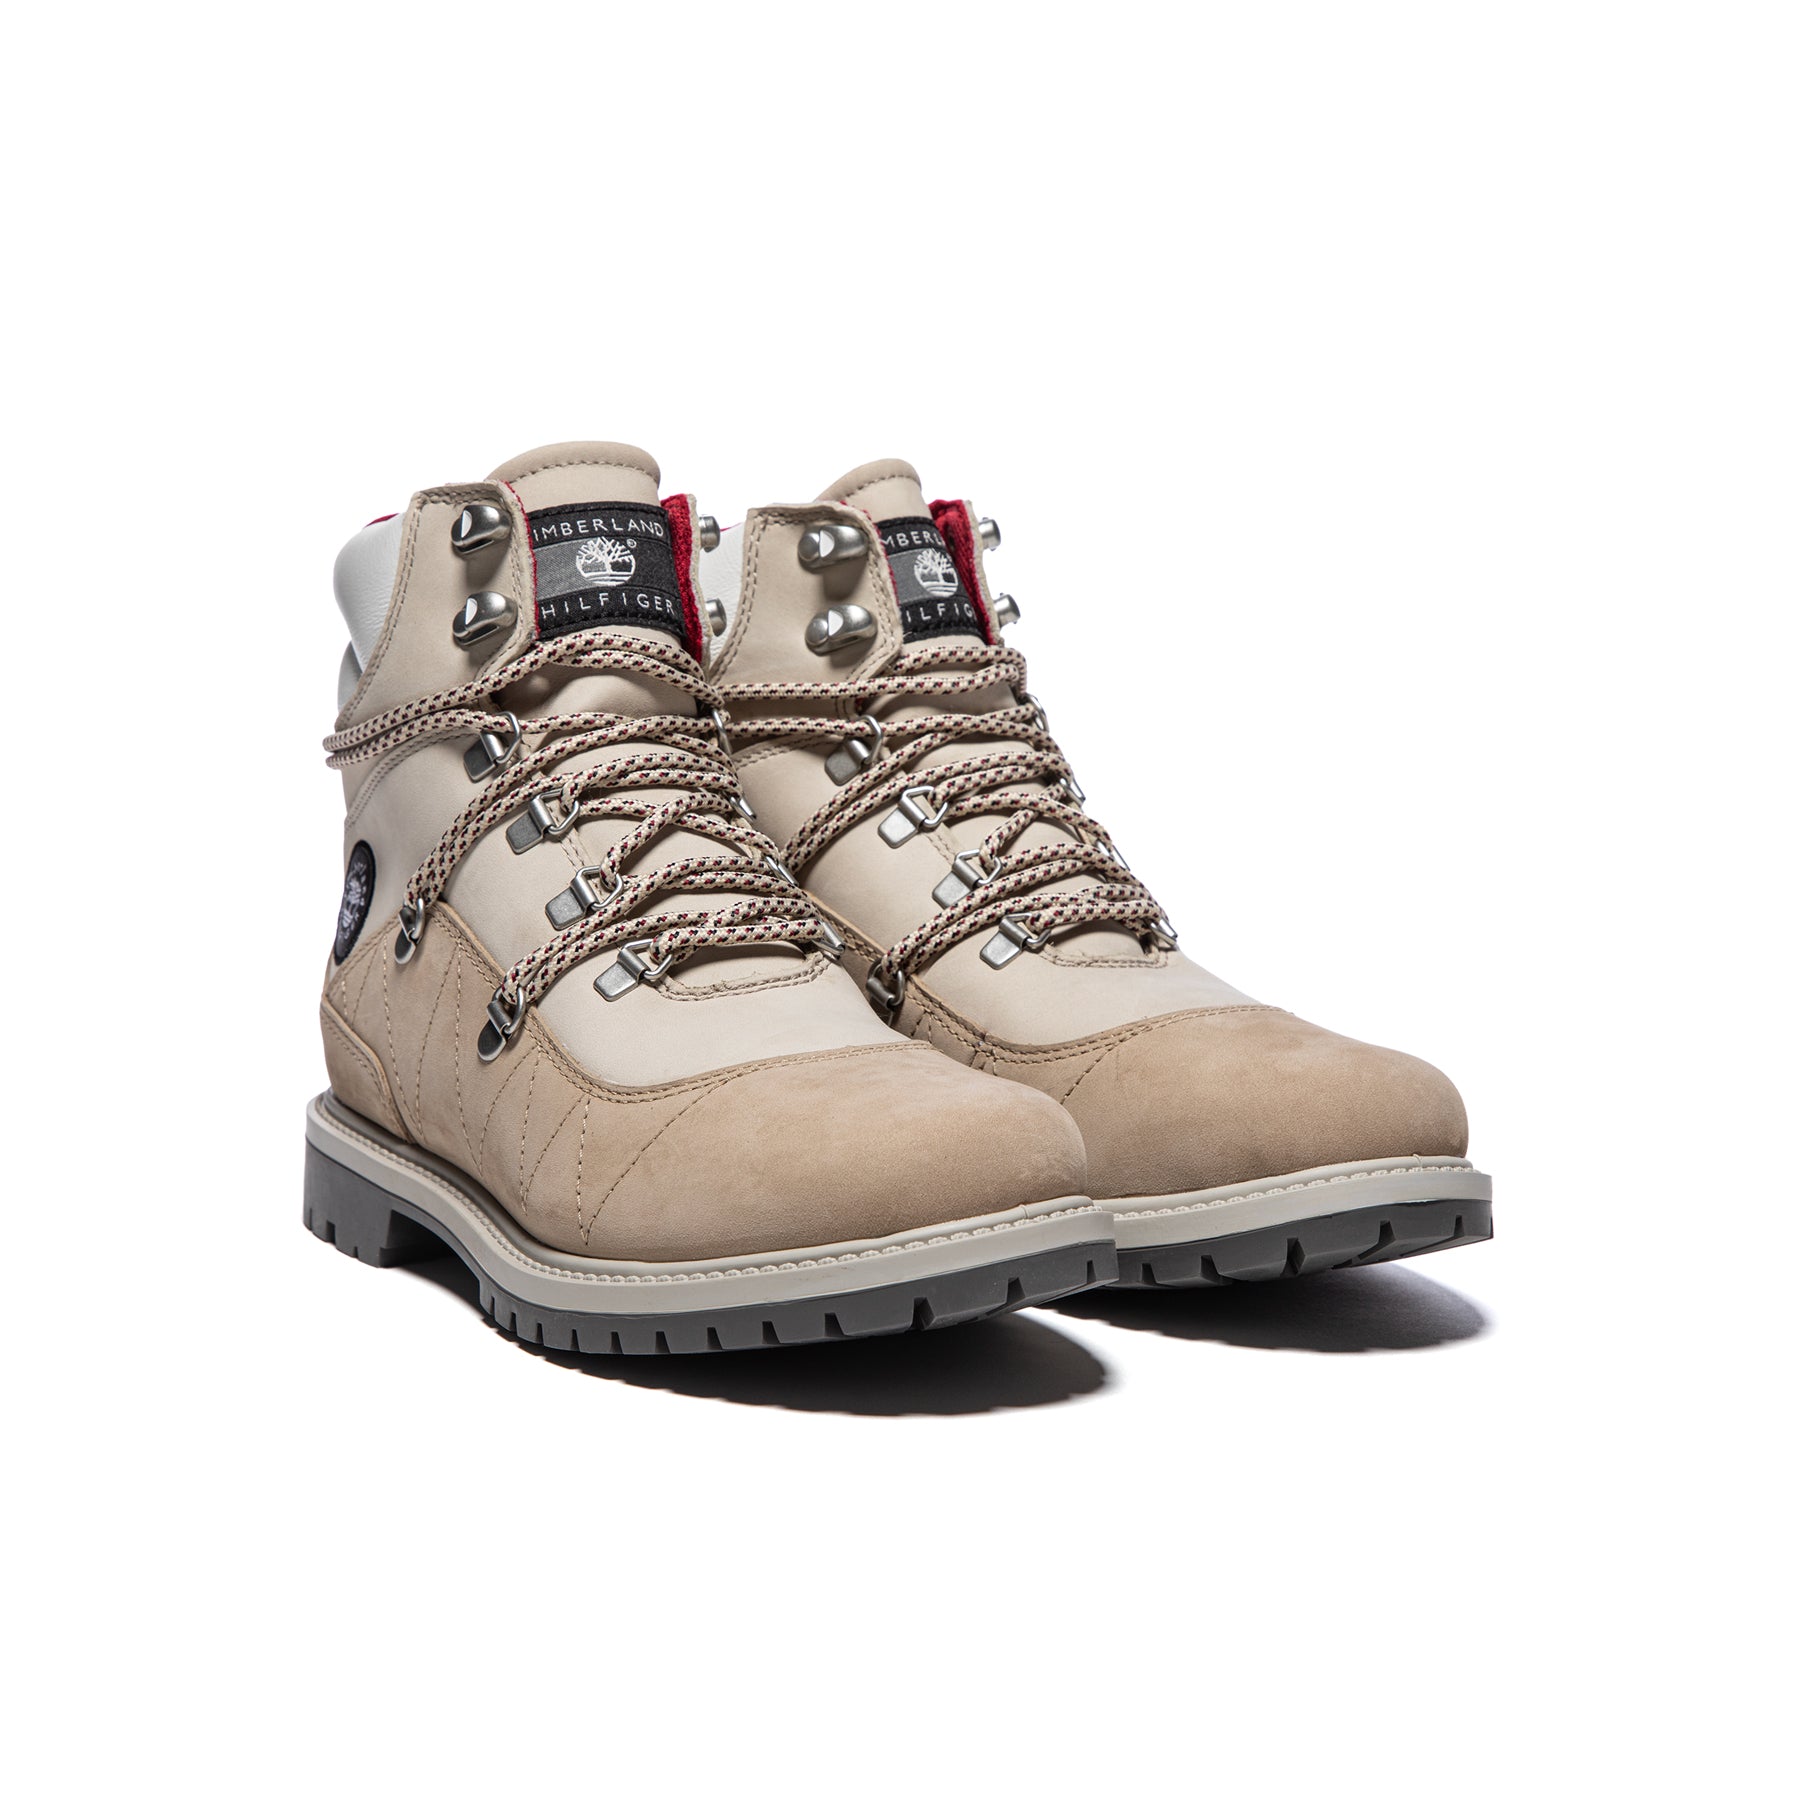 Tommy Hilfiger x Timberland Reimagined Womens 6